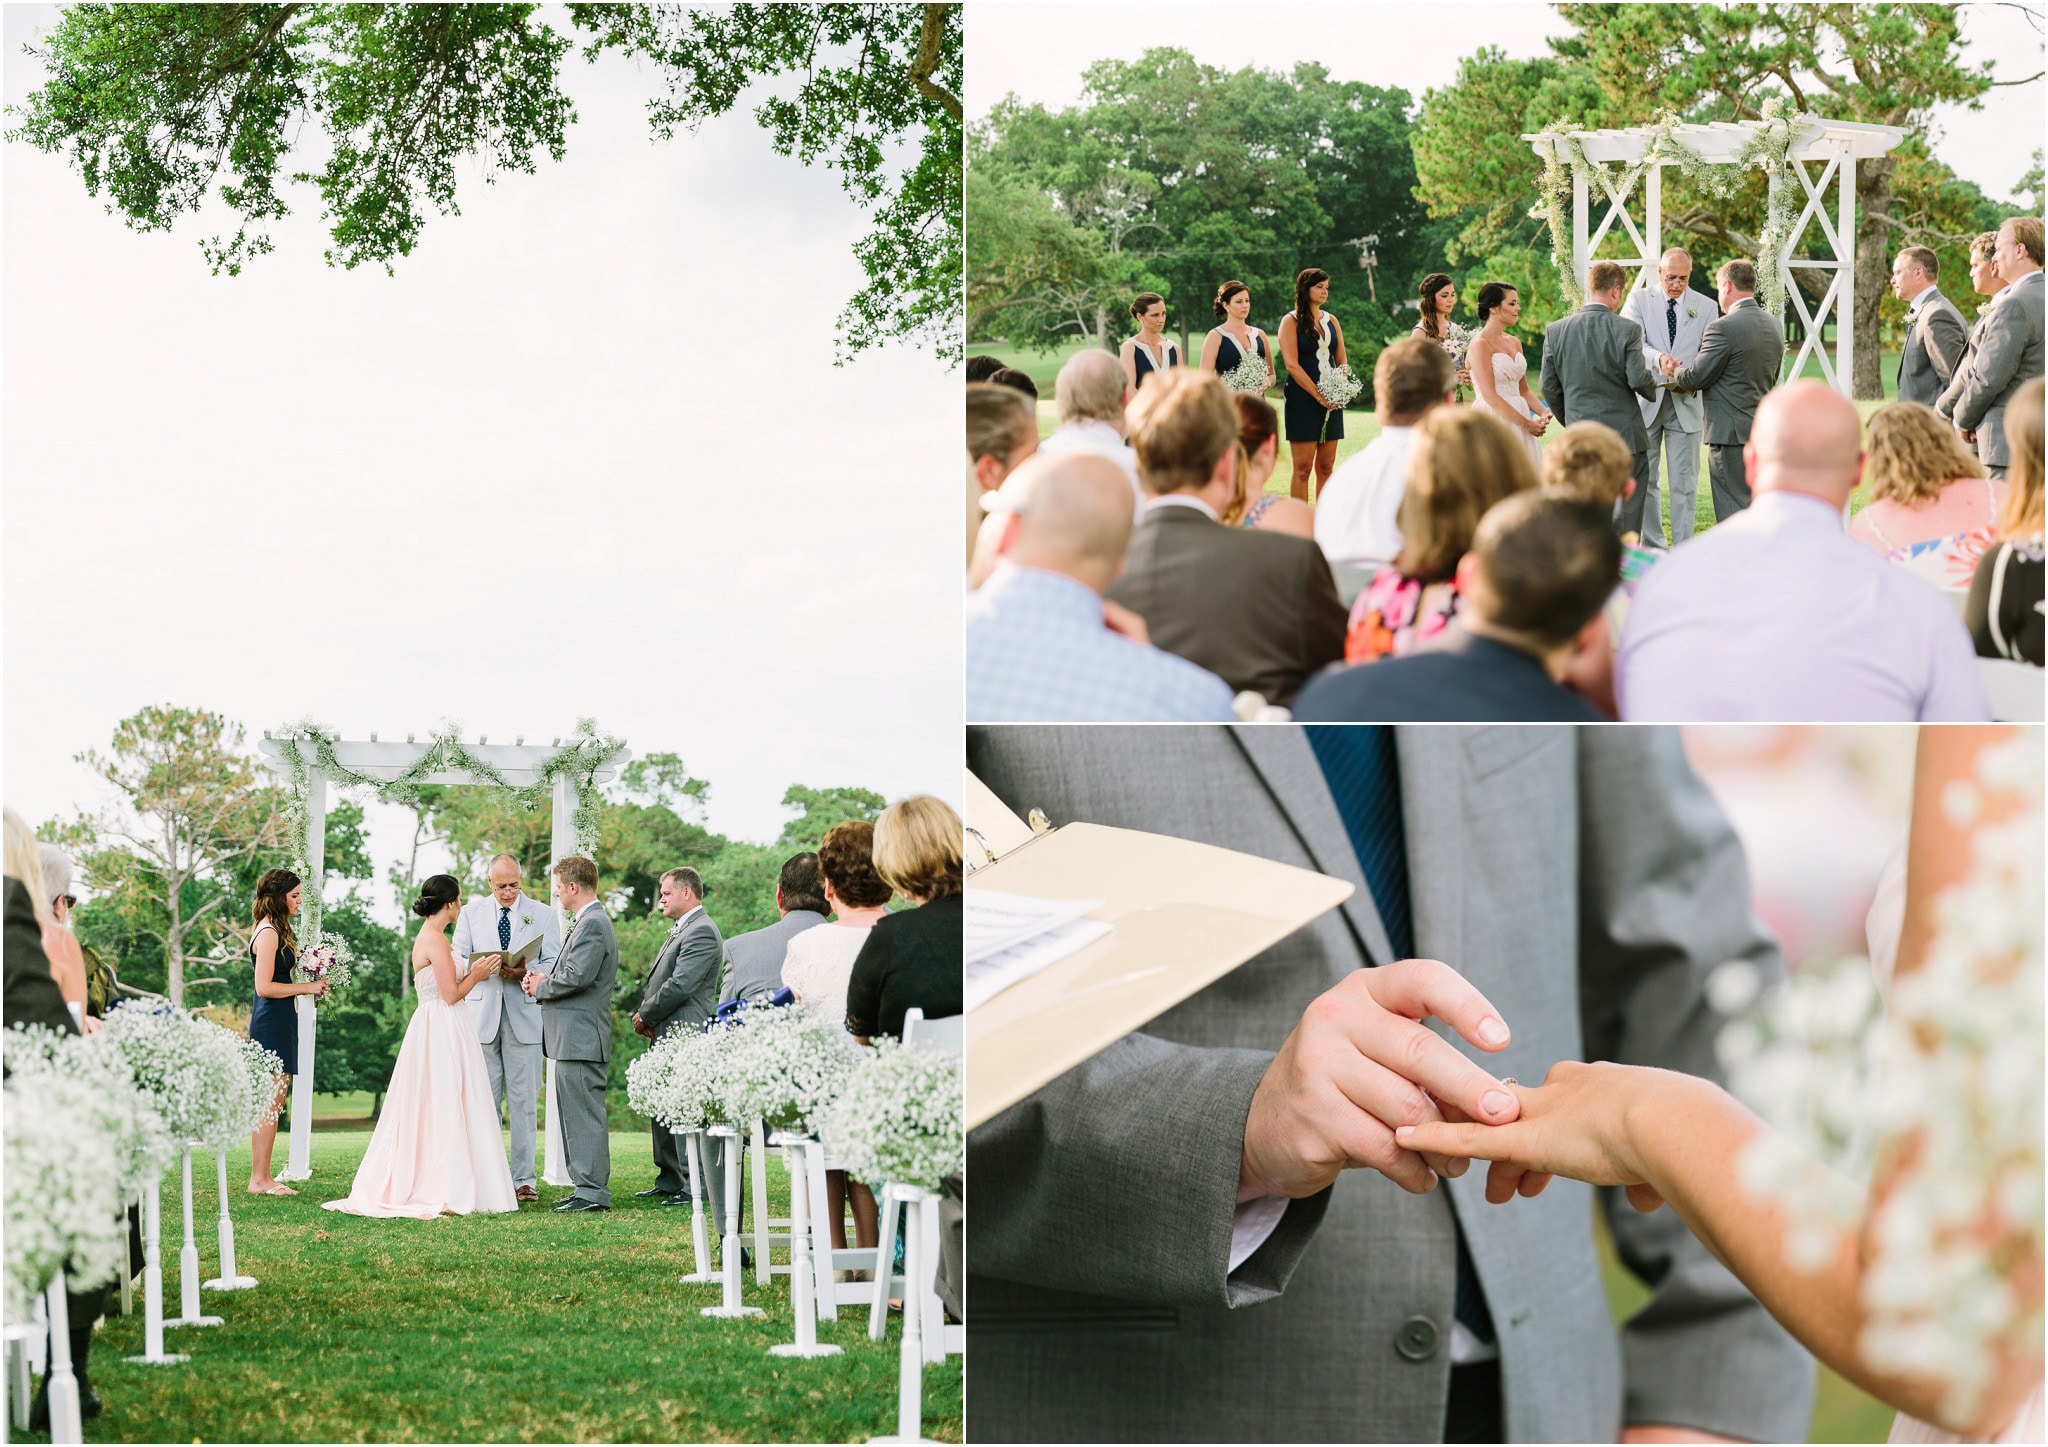 The exchanging of the rings - Myrtle Beach wedding